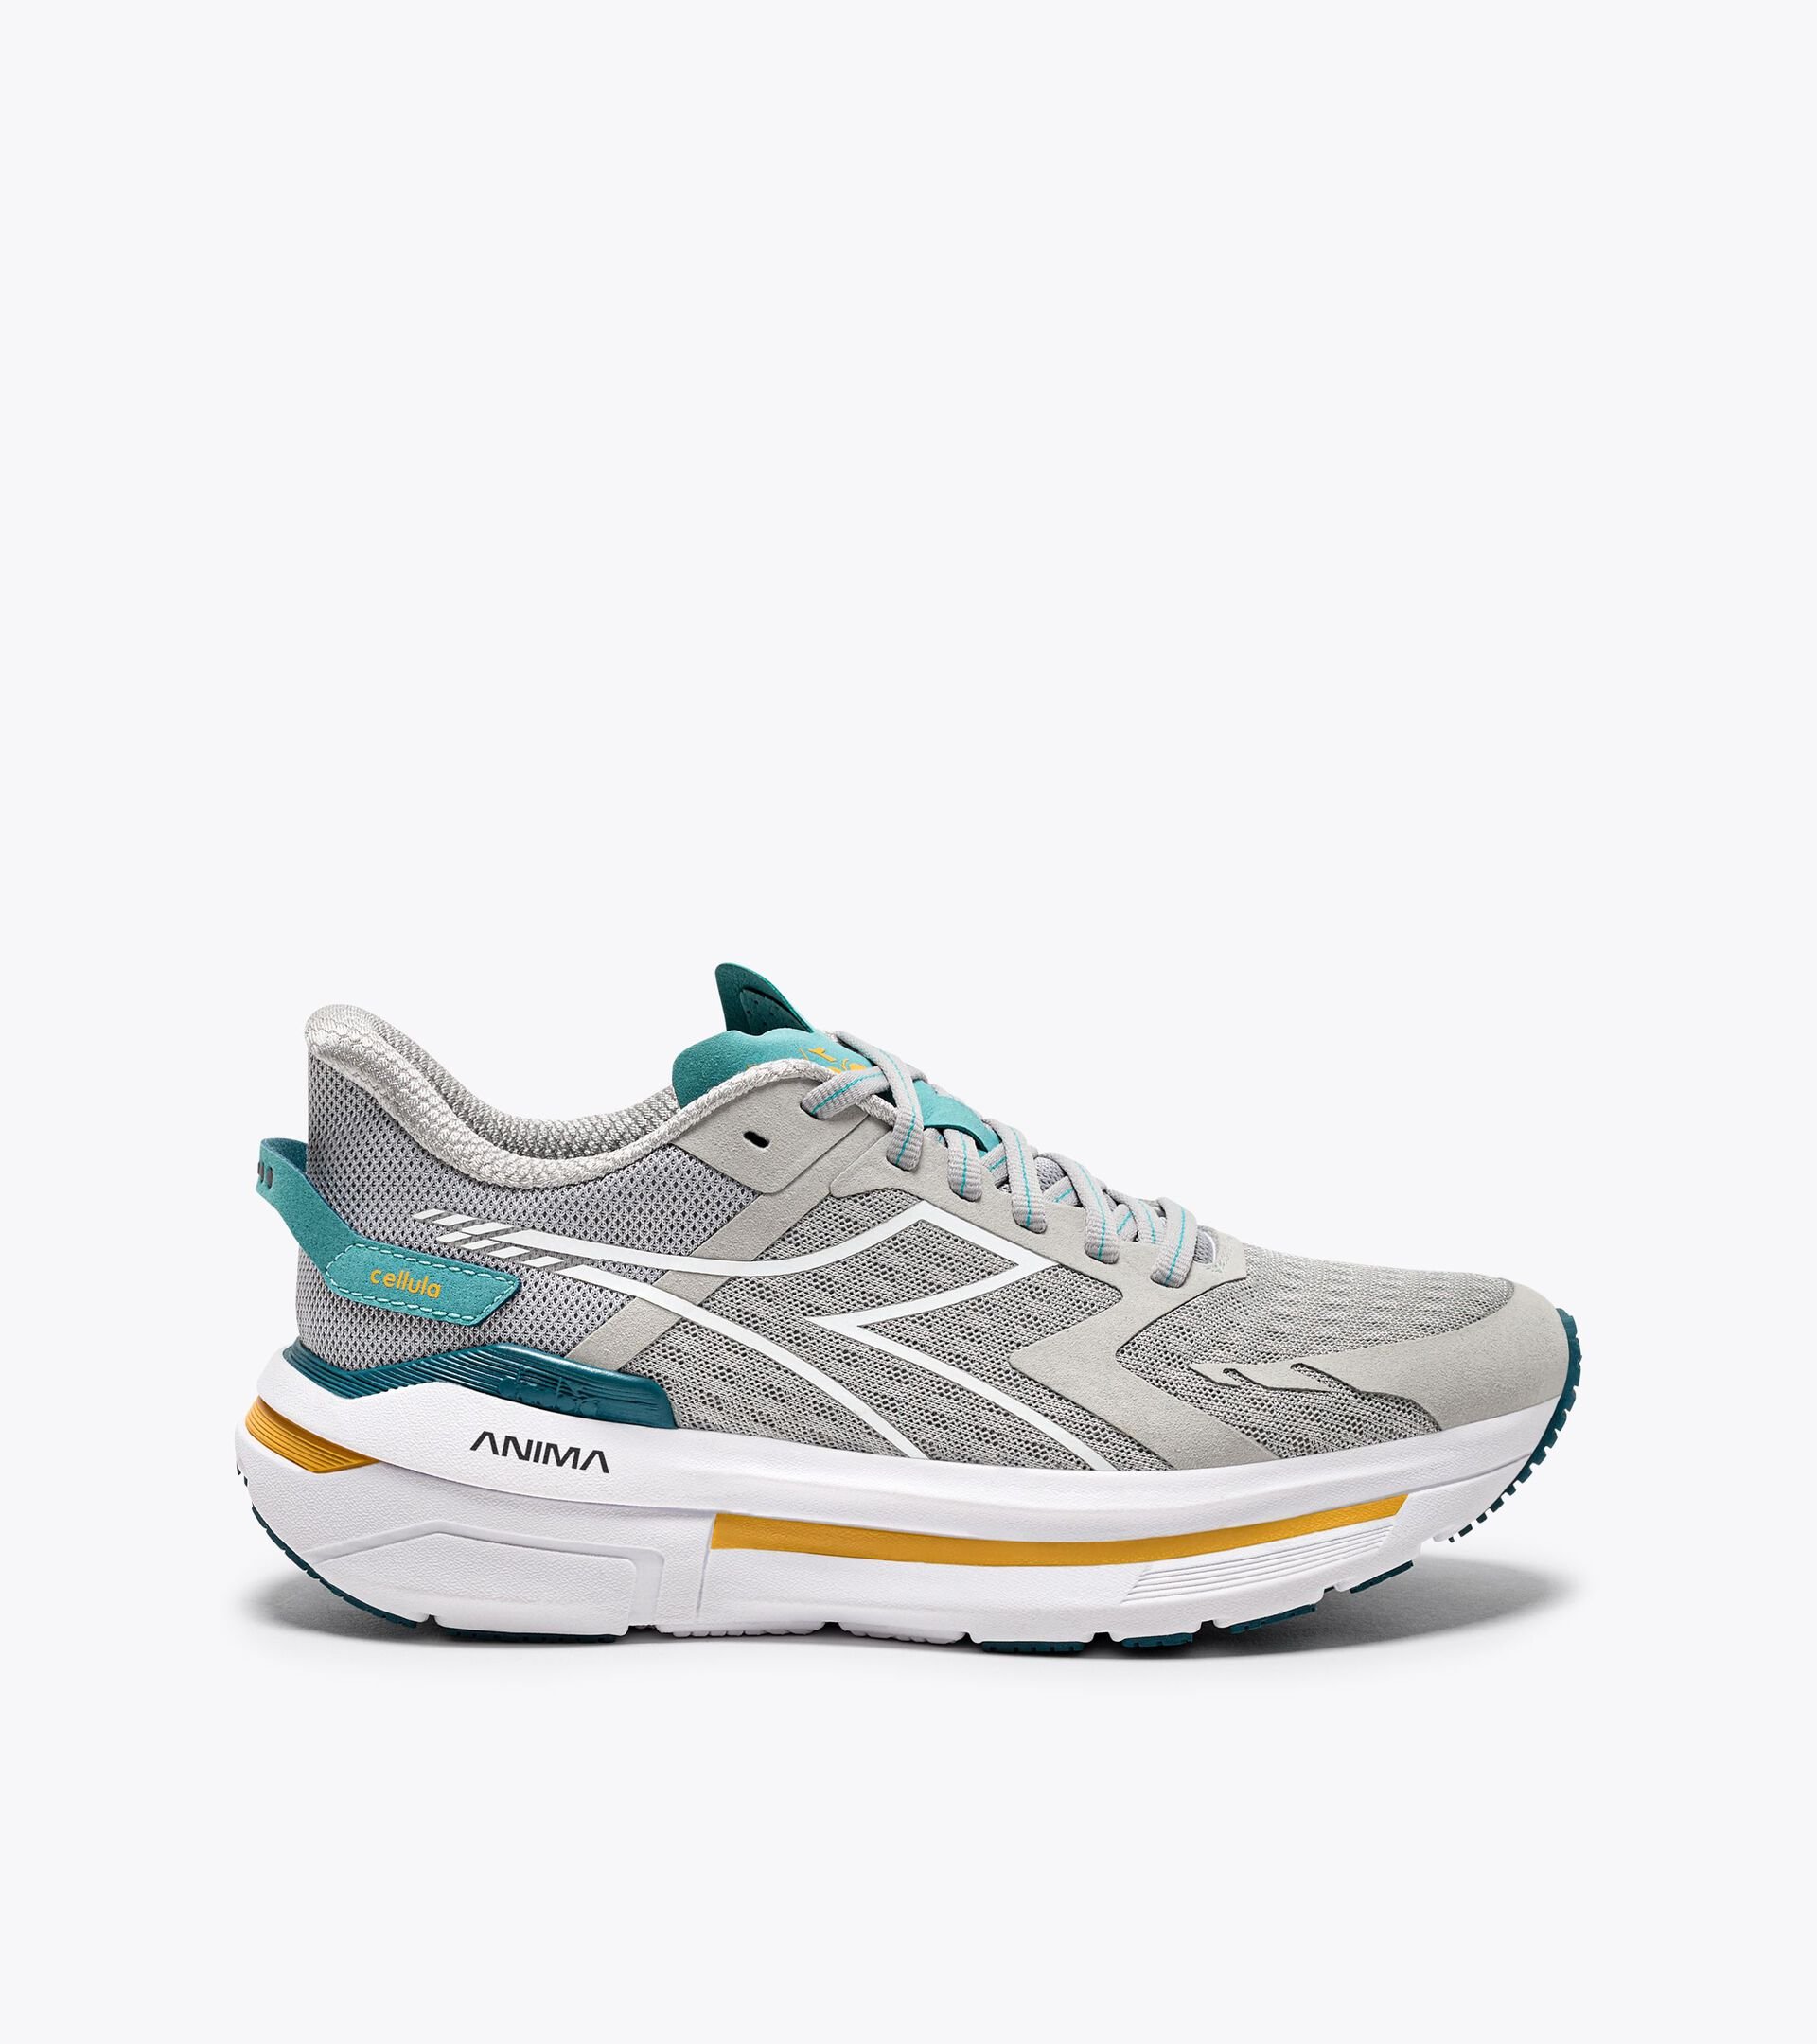 Running shoe - Comfort and stability - Women’s CELLULA W SILVER/COLONIAL BLUE - Diadora